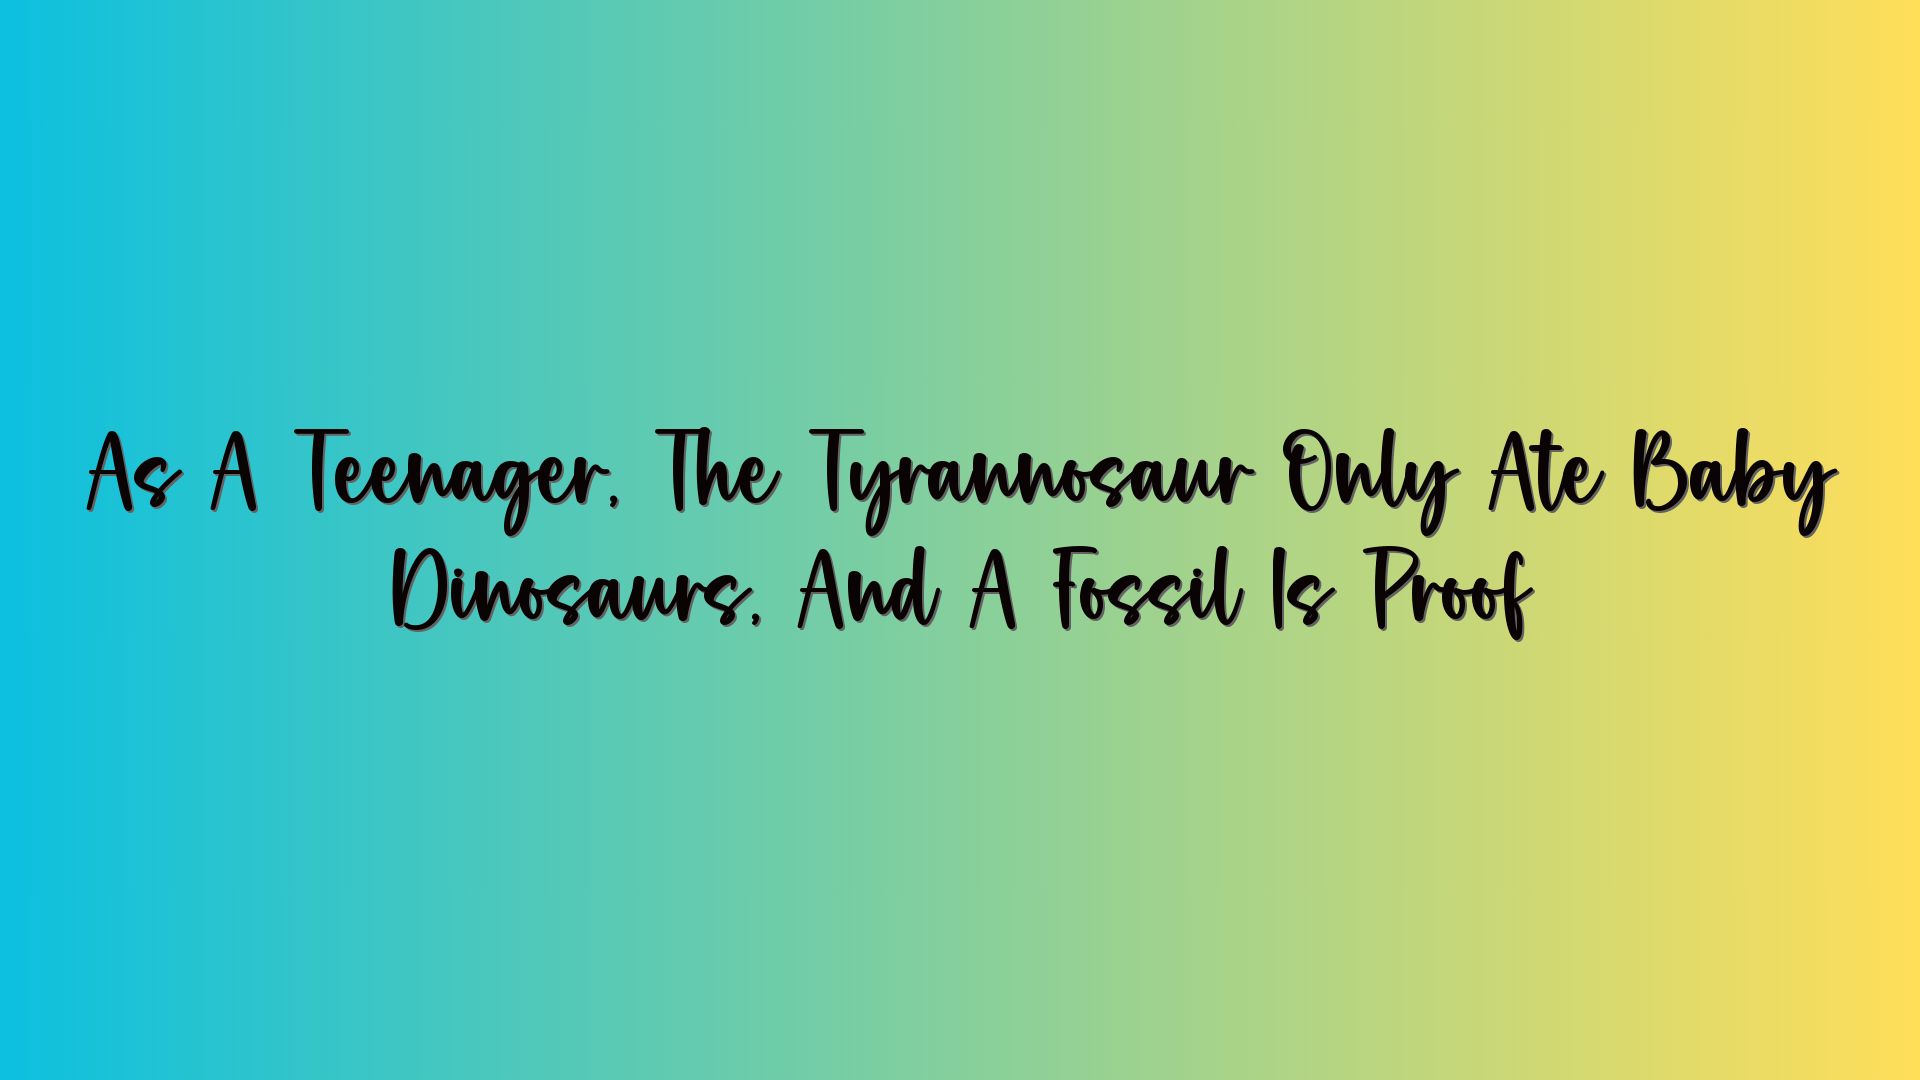 As A Teenager, The Tyrannosaur Only Ate Baby Dinosaurs, And A Fossil Is Proof